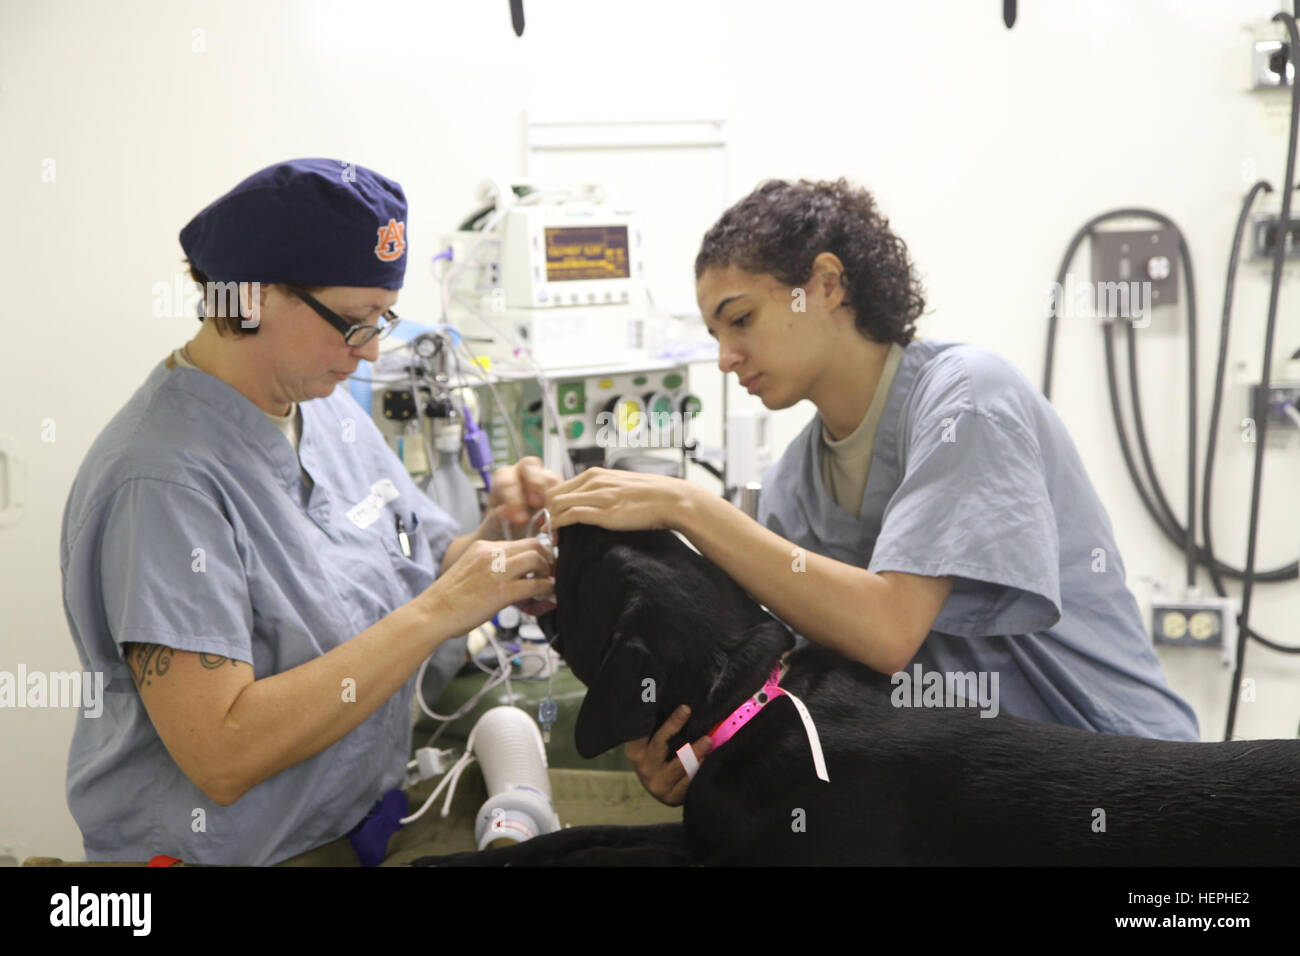 Capt. Rachel Hathorn, left, a field veterinary service officer with the 338th Medical Brigade out of Horsham, Pa., and Spc., Alaysha Davis, an animal care specialist with the 169th Medical Dental Veterinary Services out of Fort Gordon, Ga., prepare a dog to receive veterinary care during Greater Chenango Cares, July 14, 2015. Greater Chenango Cares is one of many Innovative Readiness Training missions designed to provide real-world training in a joint civil-military environment while delivering world-class medical care to the citizens of Chenango County, N.Y., from July 13-23. (U.S. Army photo Stock Photo